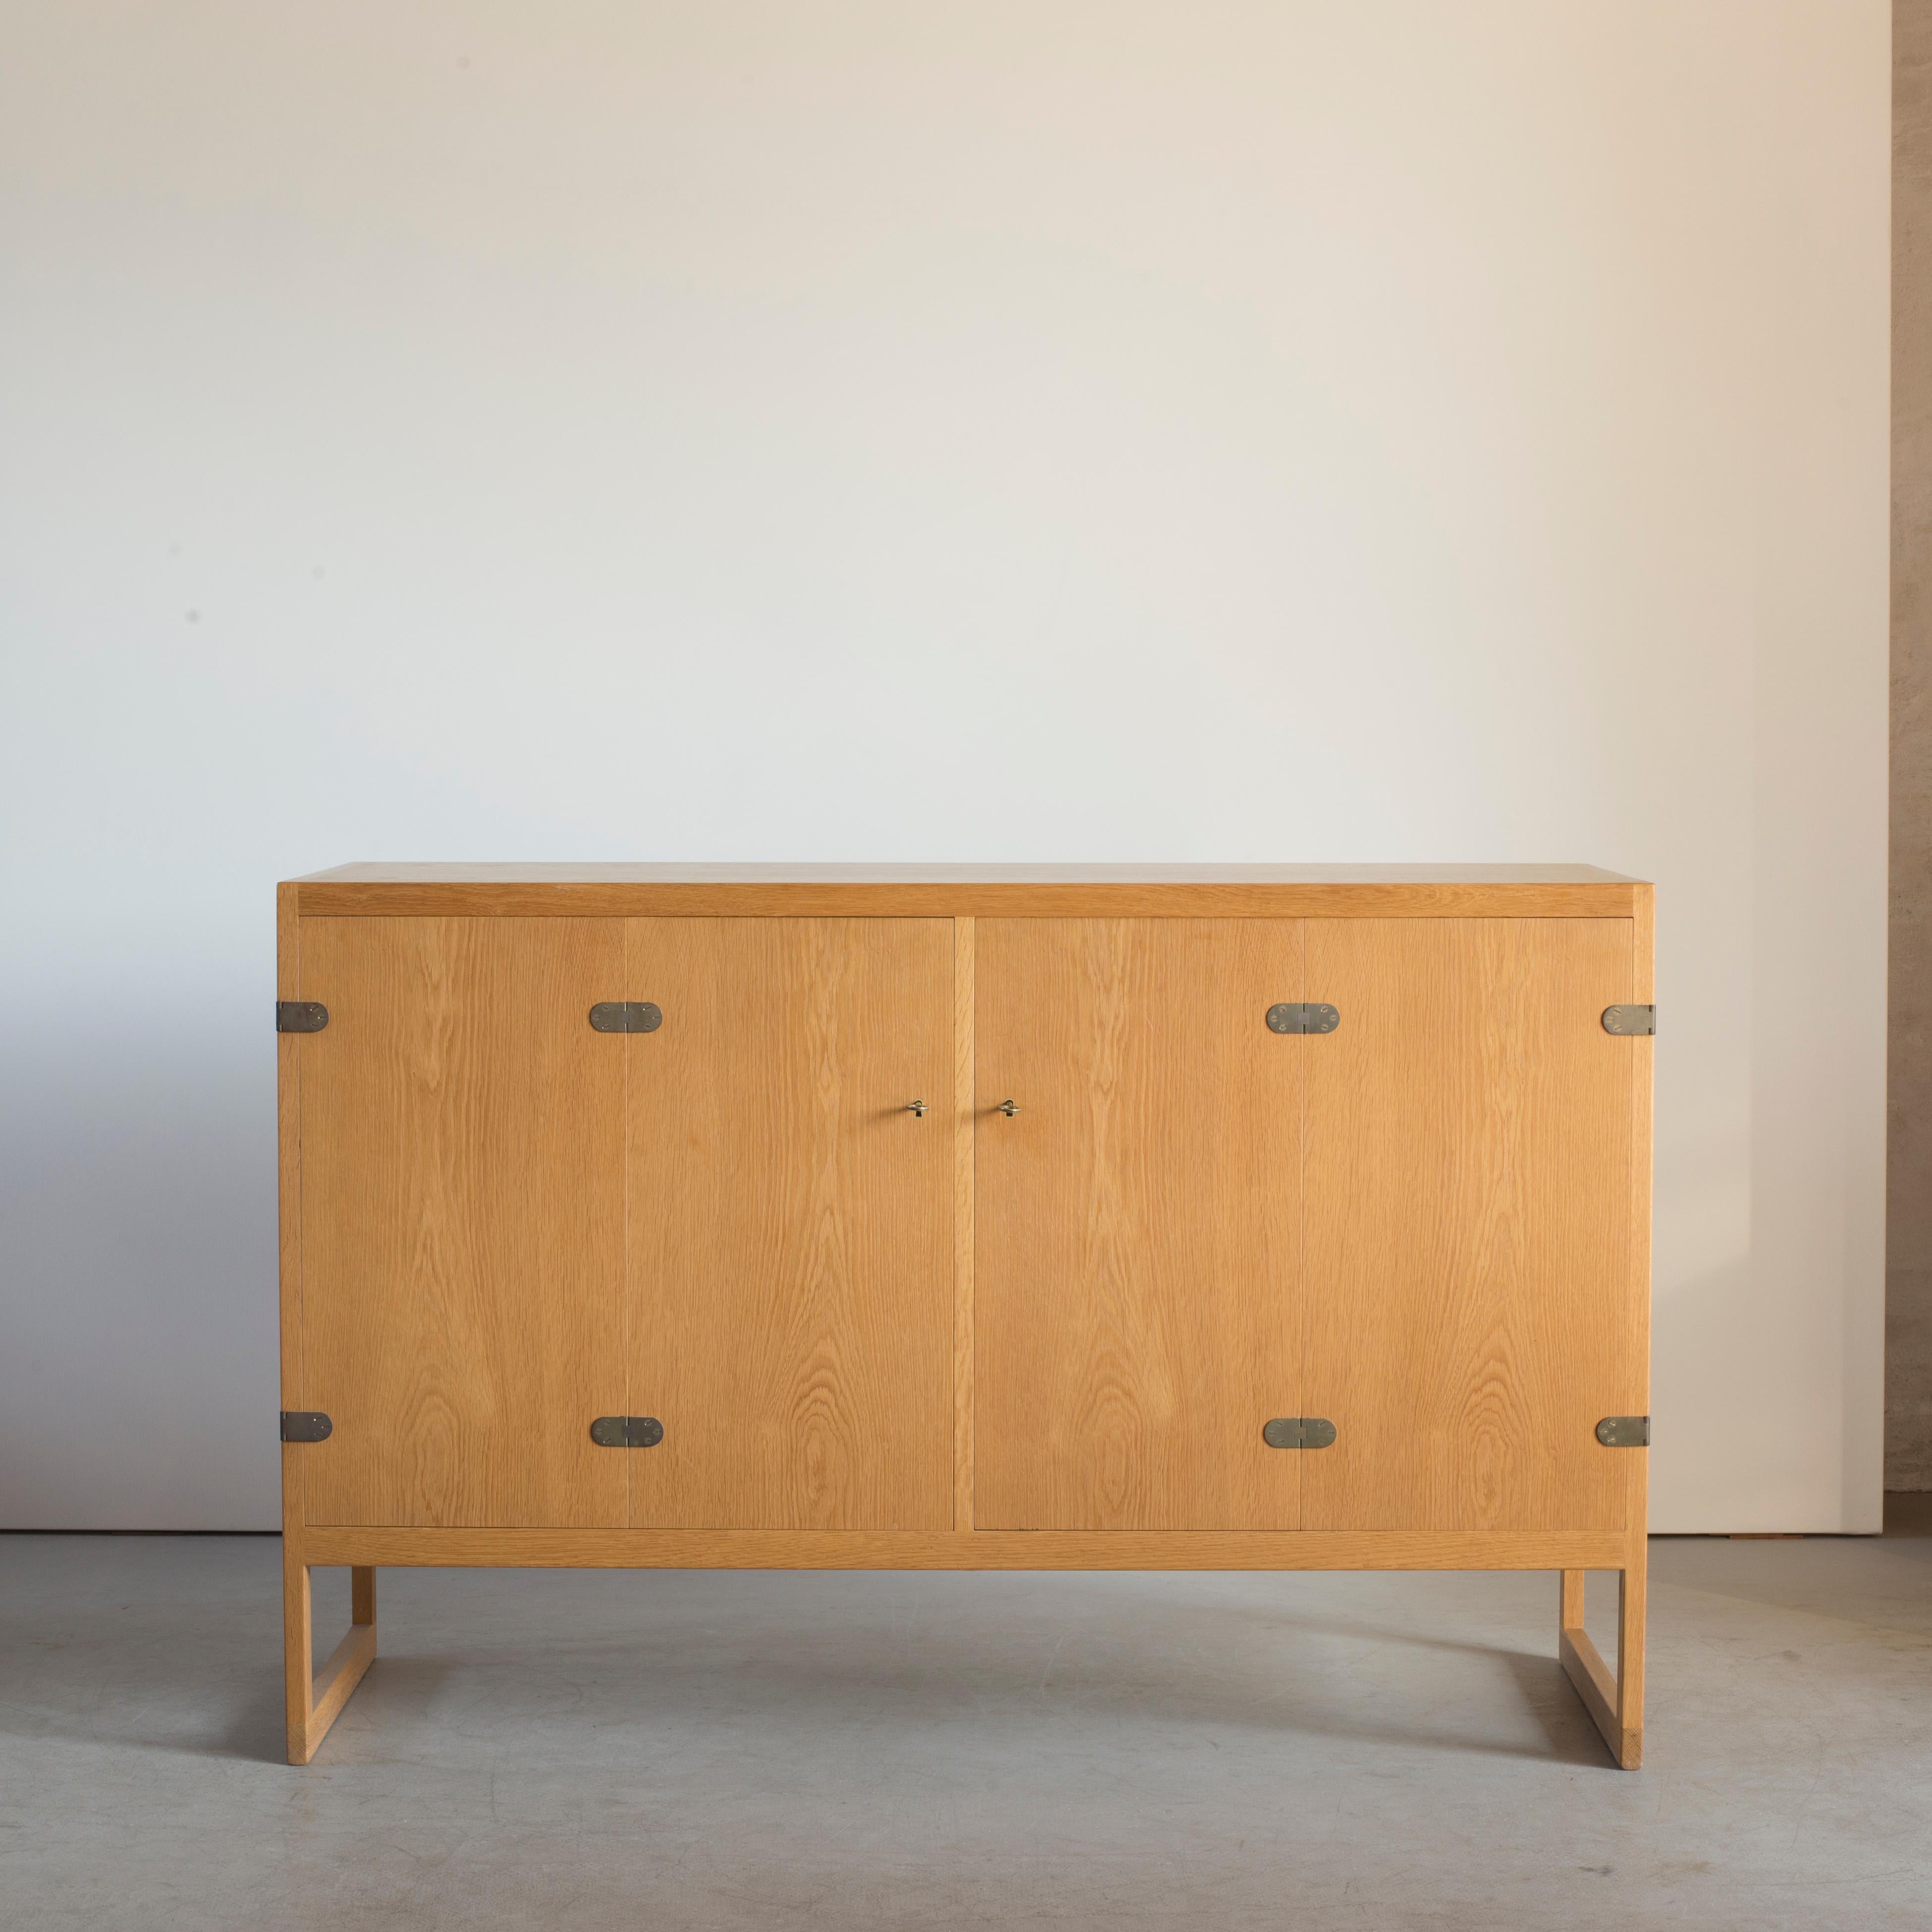 Børge Mogensen oak sideboard mounted on runner frame, front with two foldable doors. Executed by P. Lauritsen & Søn.